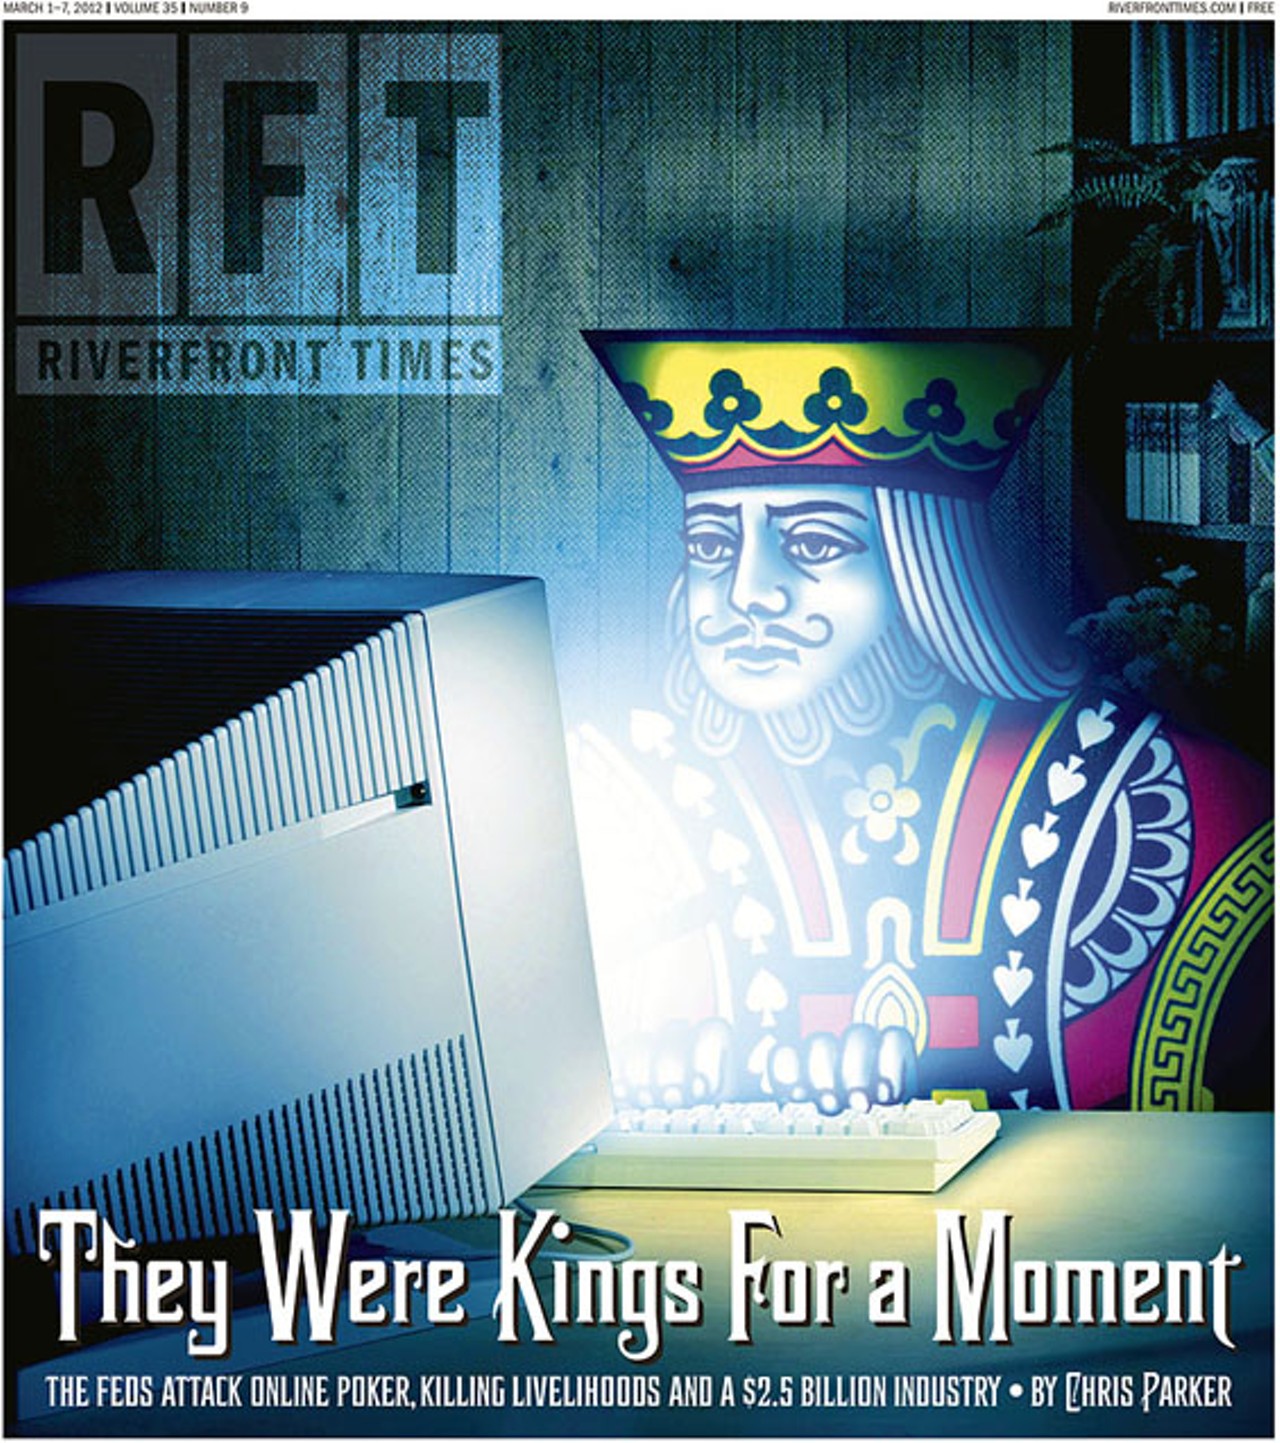 Kings for a Moment: The feds attack online poker, killing a $2.5 billion industry by Chris Parker in the March 1 issue. Cover: Illustration by Jesse Lenz.